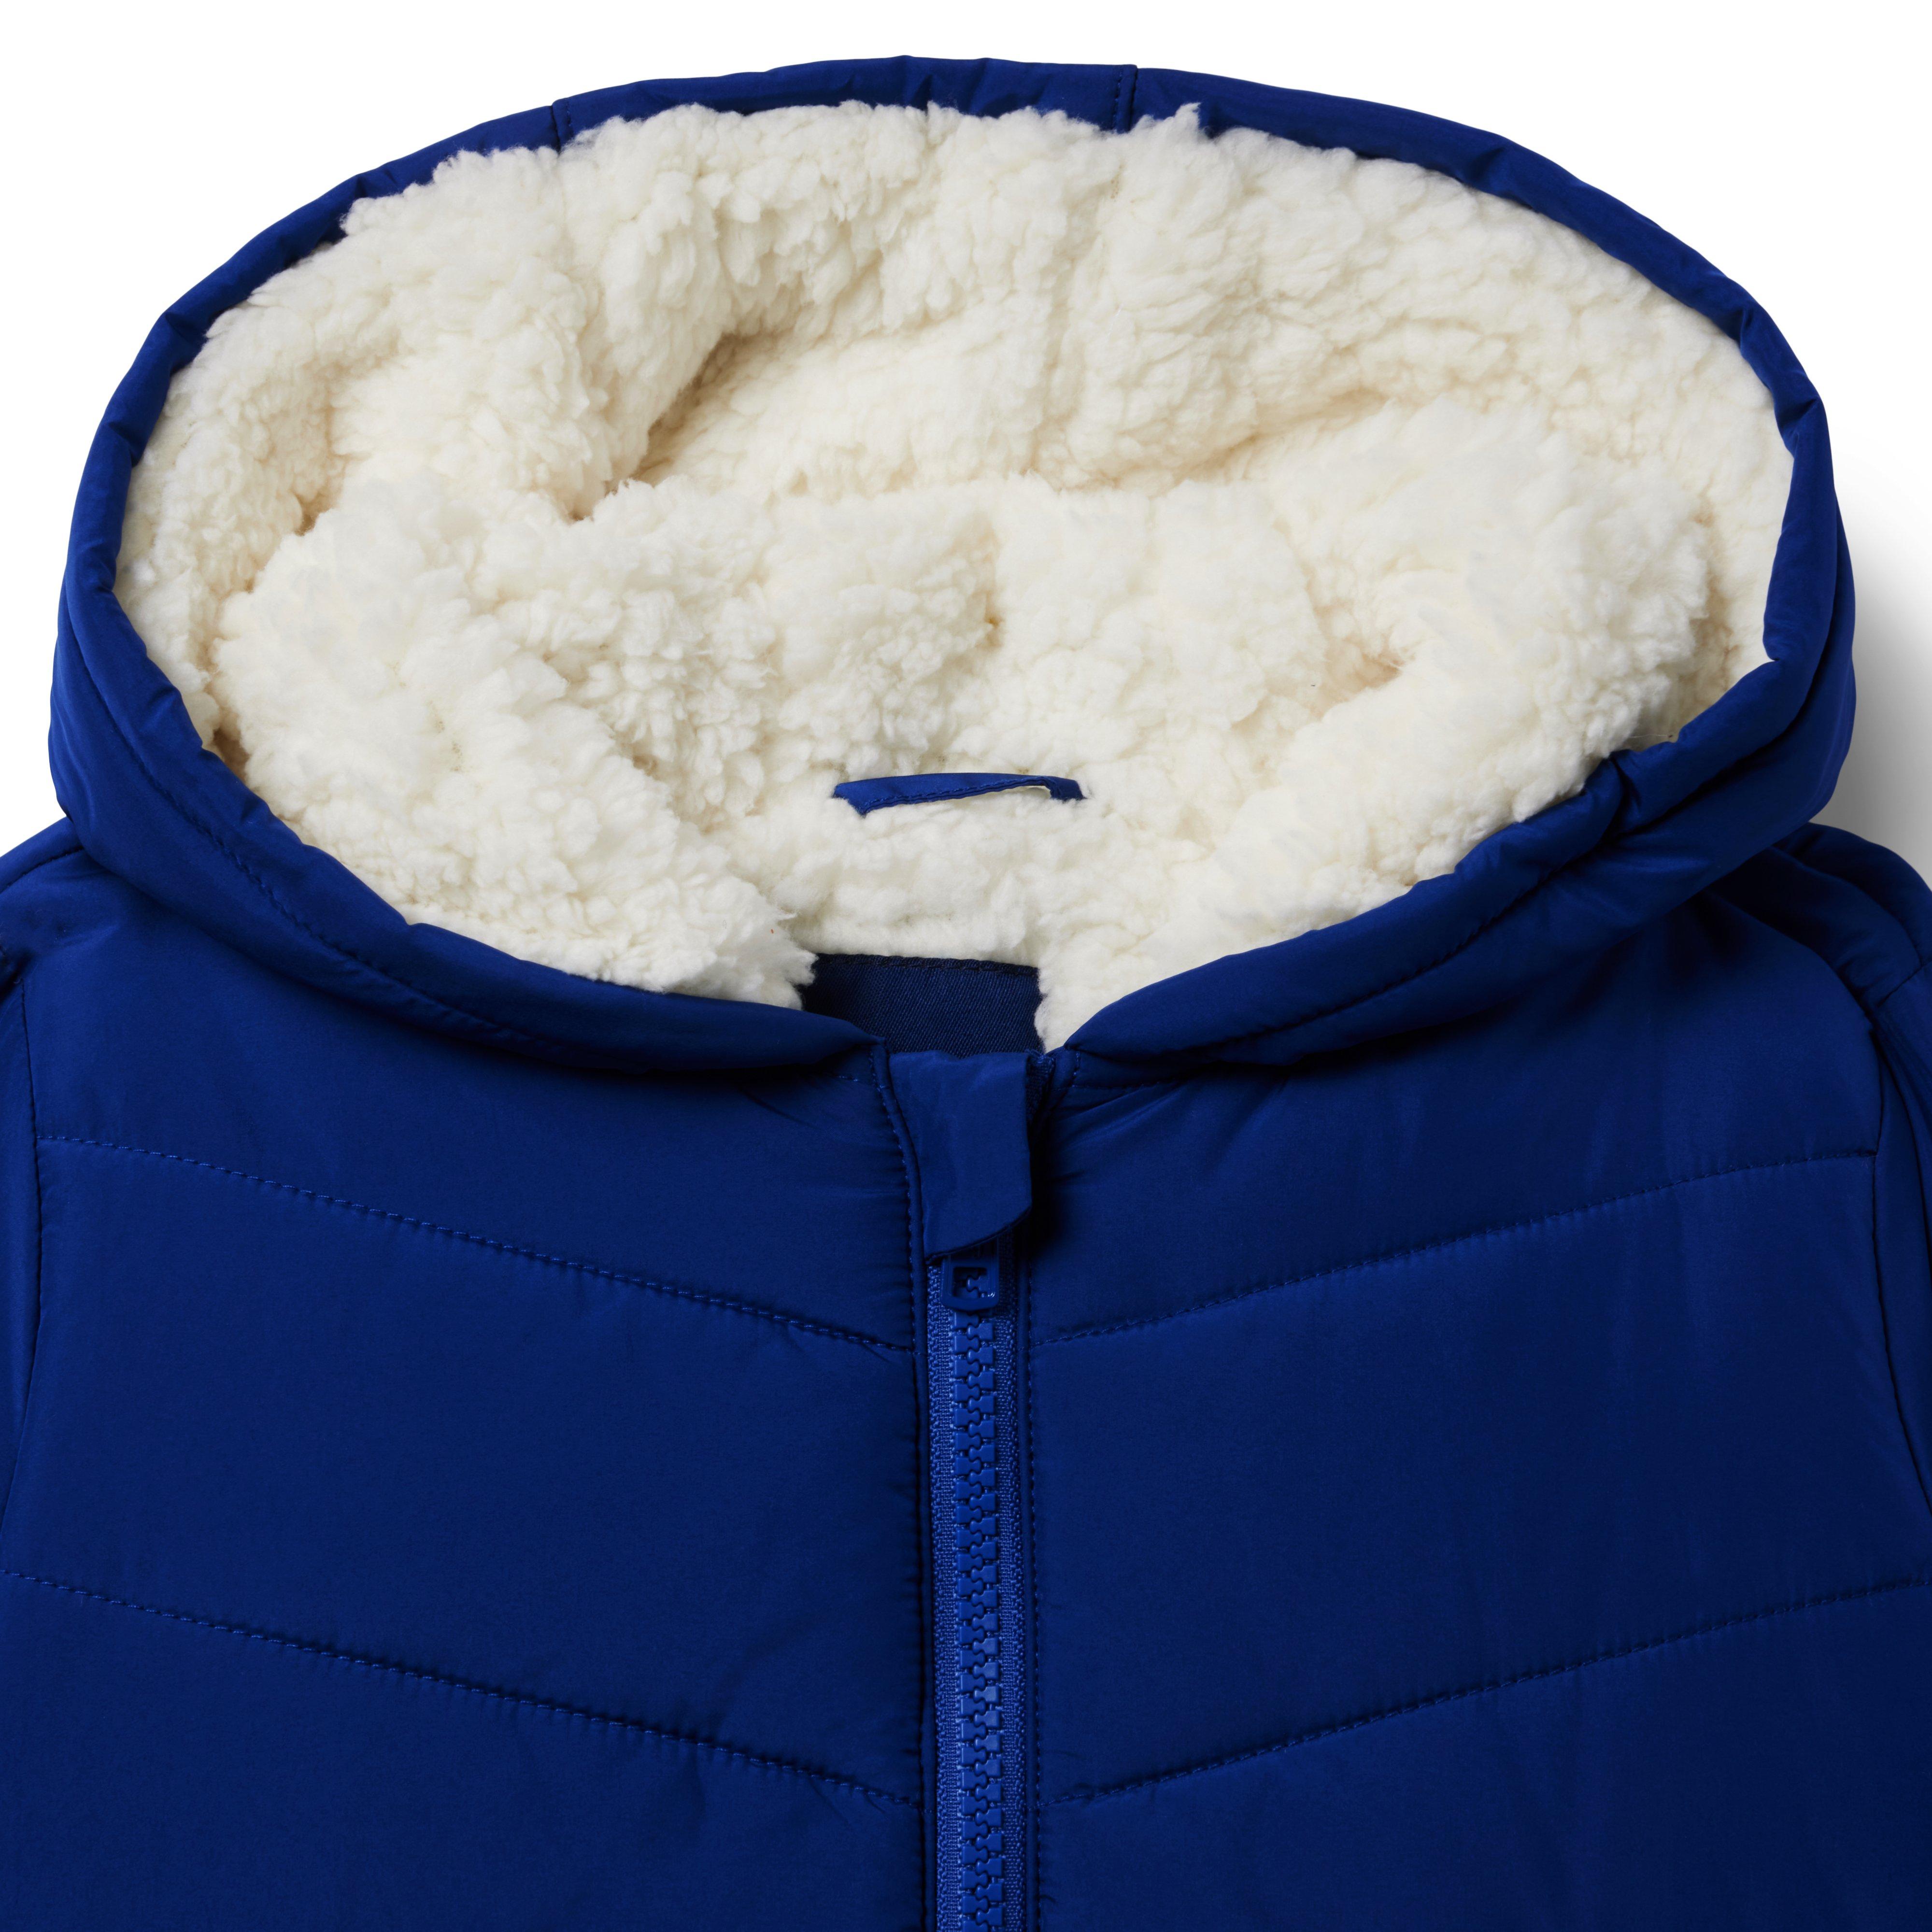 Sherpa-Lined Hooded Puffer Jacket